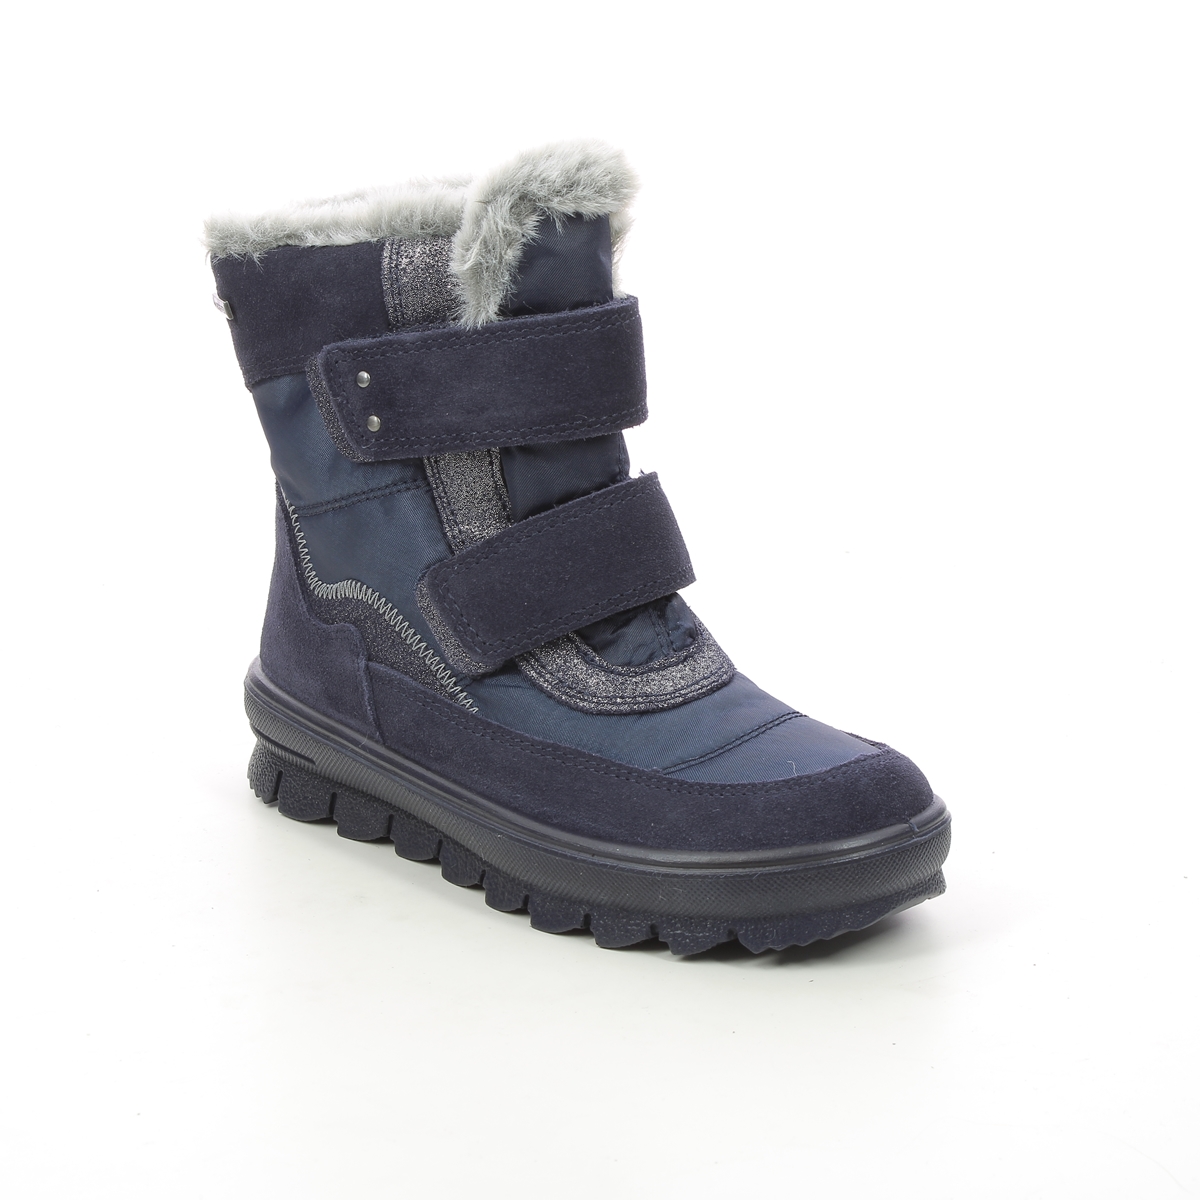 Superfit Flavia Vel Gtx Navy Suede Kids Girls Boots 1009214-8000 In Size 32 In Plain Navy Suede For kids